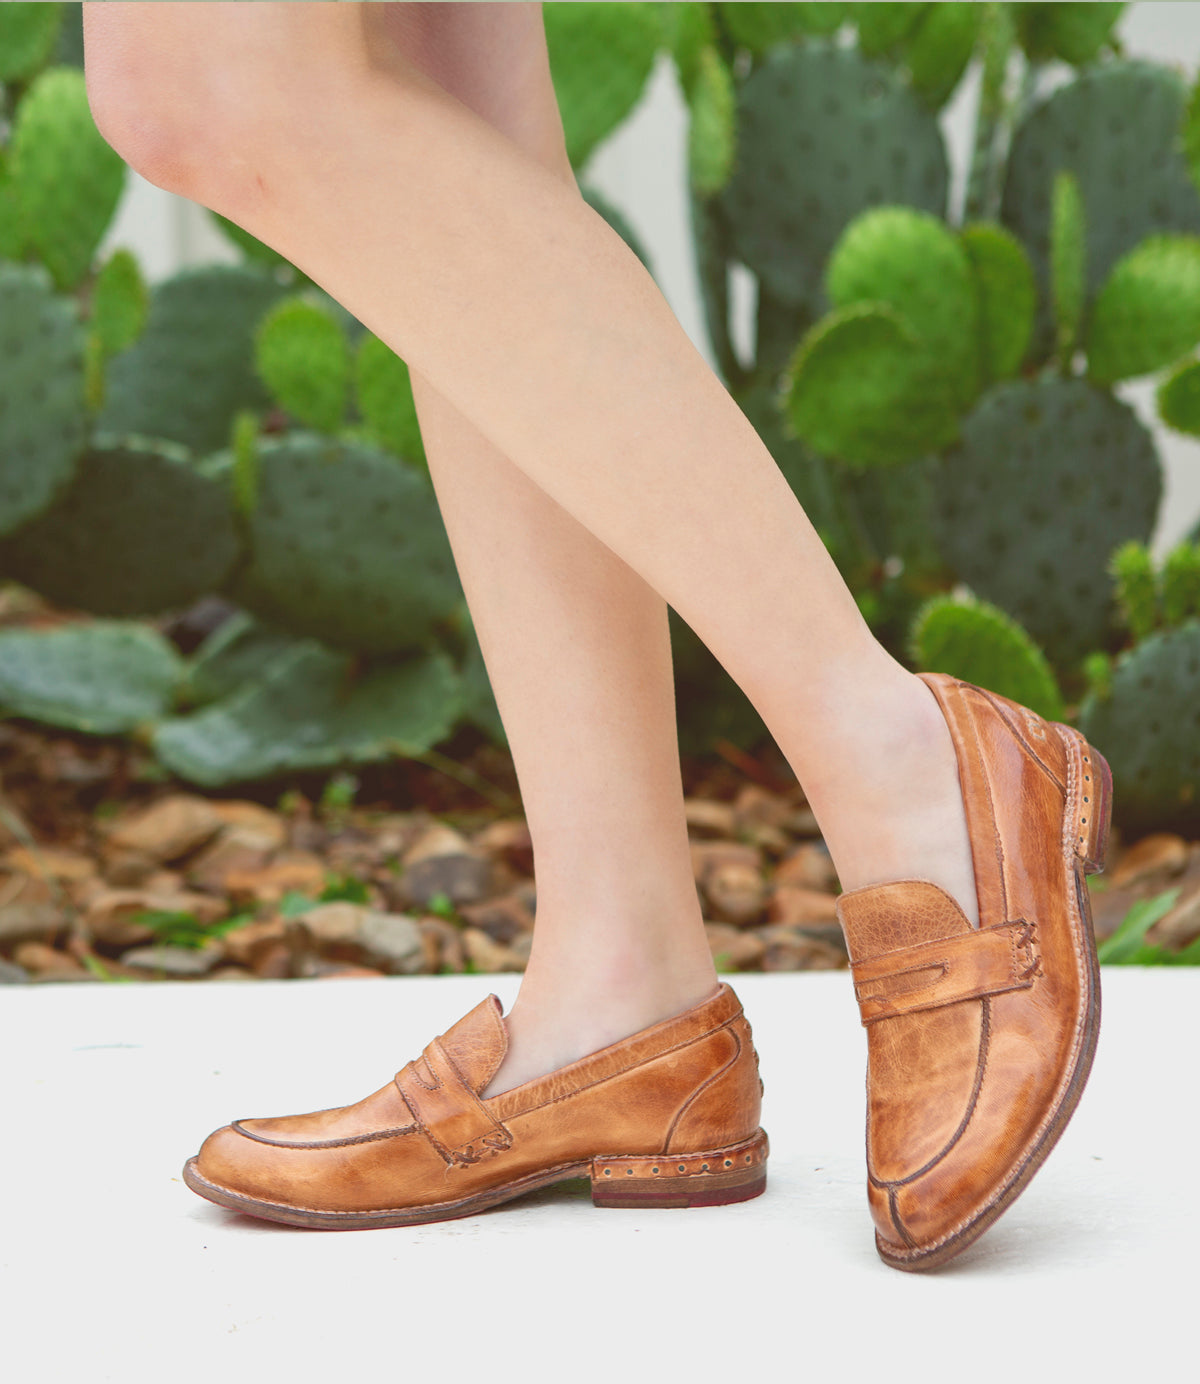 A woman wearing a pair of Bed Stu Reina tan loafers in front of a cactus.